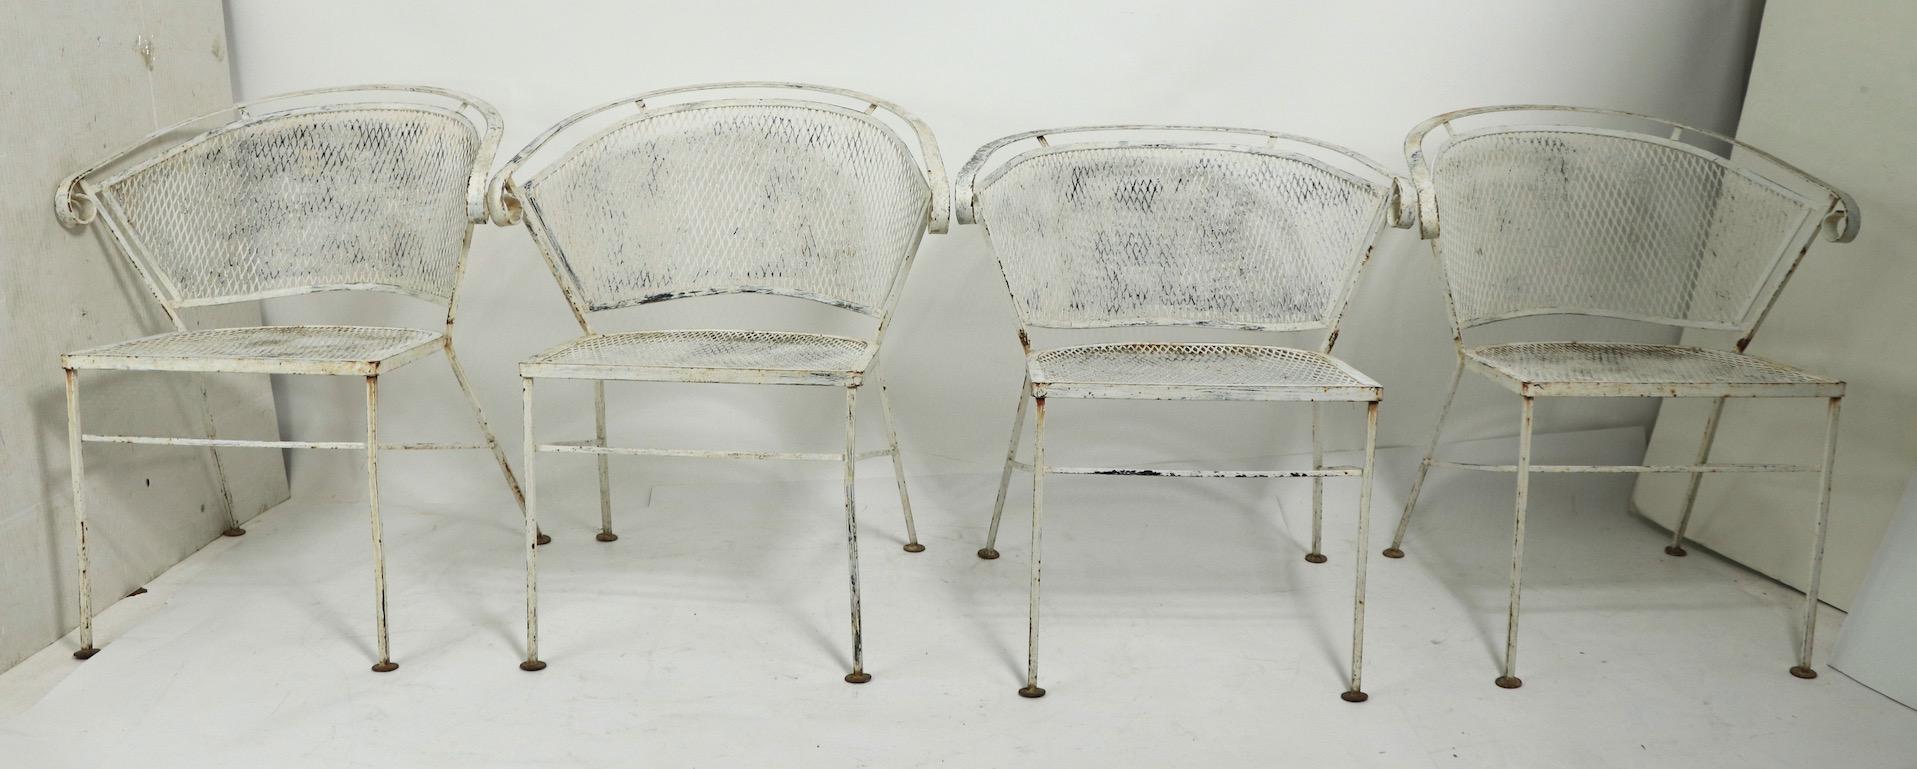 Nice set of 4 garden, patio dining chairs, attributed to Salterini. The chairs are structurally sound and sturdy, they are currently in later white paint finish, which shows significant cosmetic wear, please see images. If you look closely, you